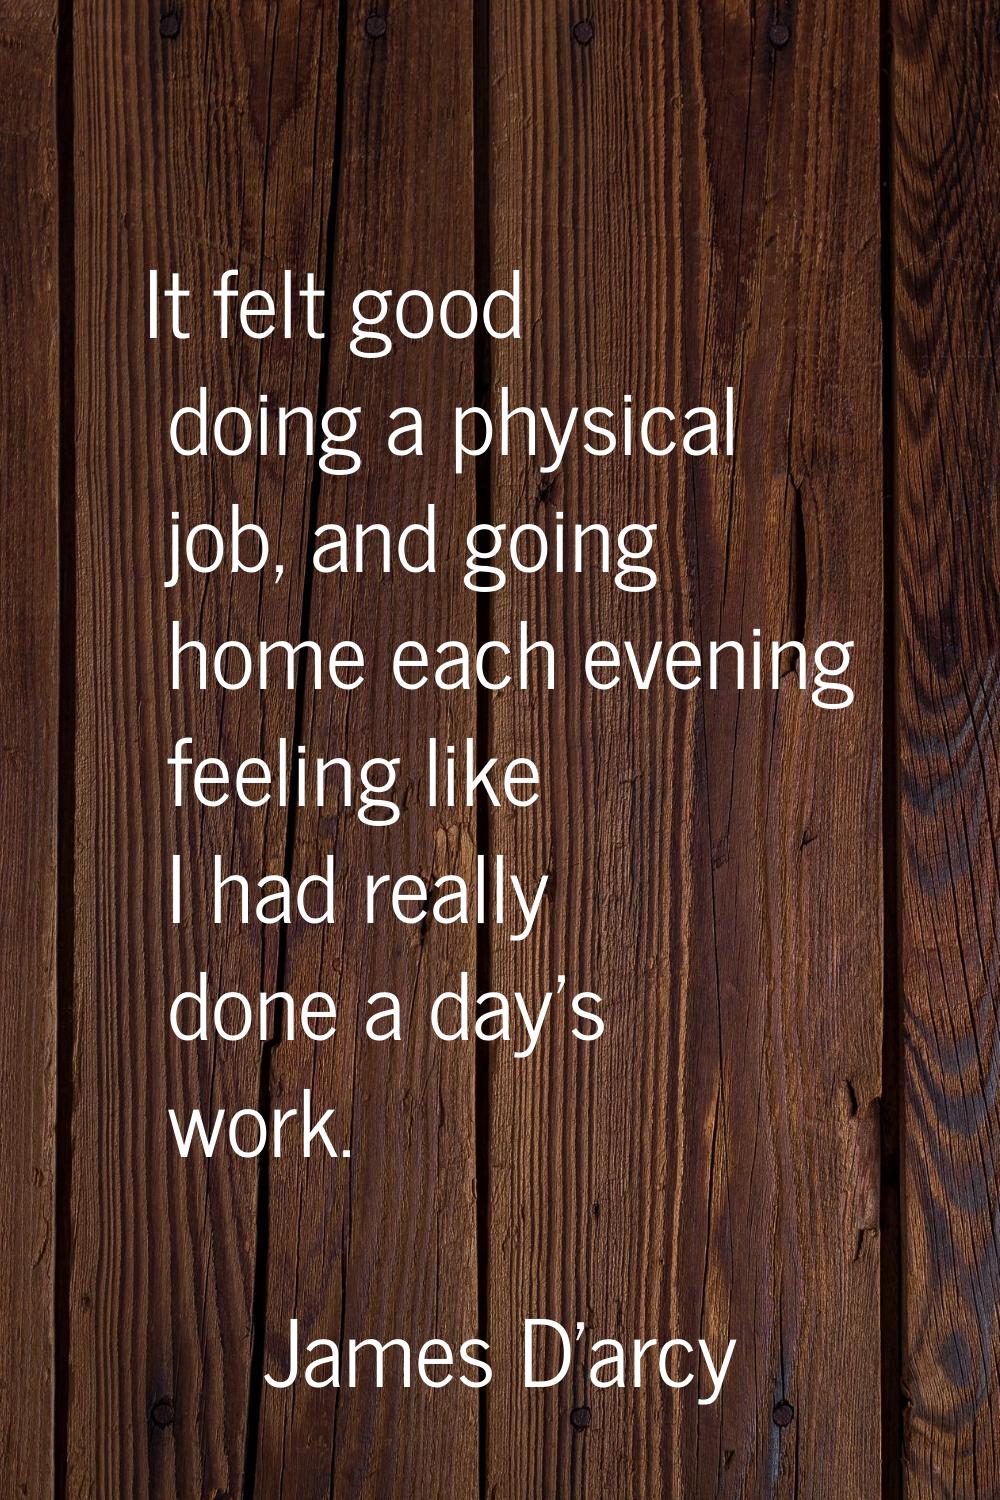 It felt good doing a physical job, and going home each evening feeling like I had really done a day